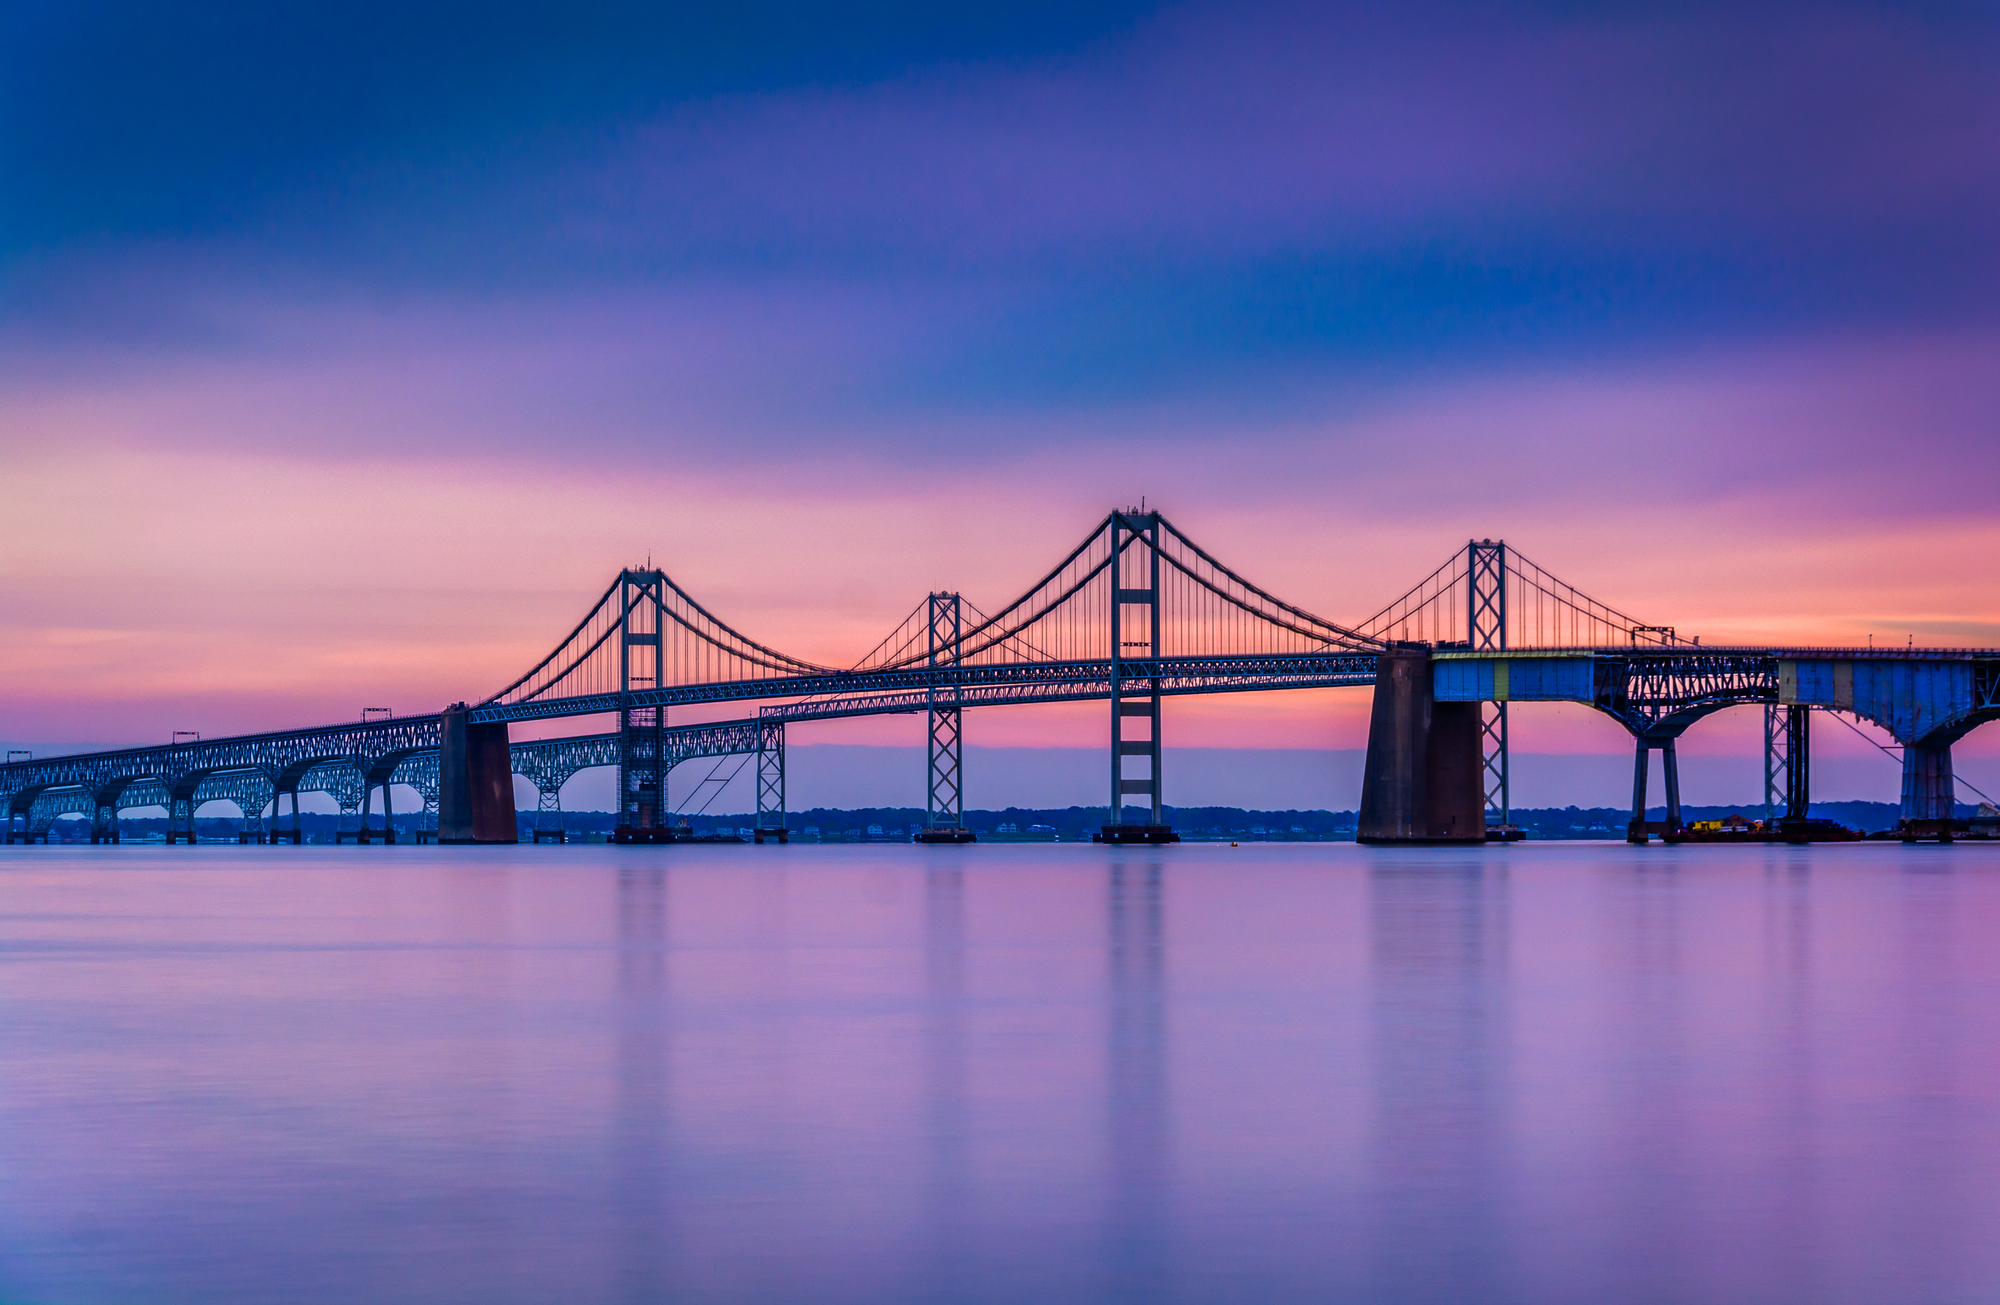 A scenic bridge over a body of water during a beautiful sunset in Maryland.